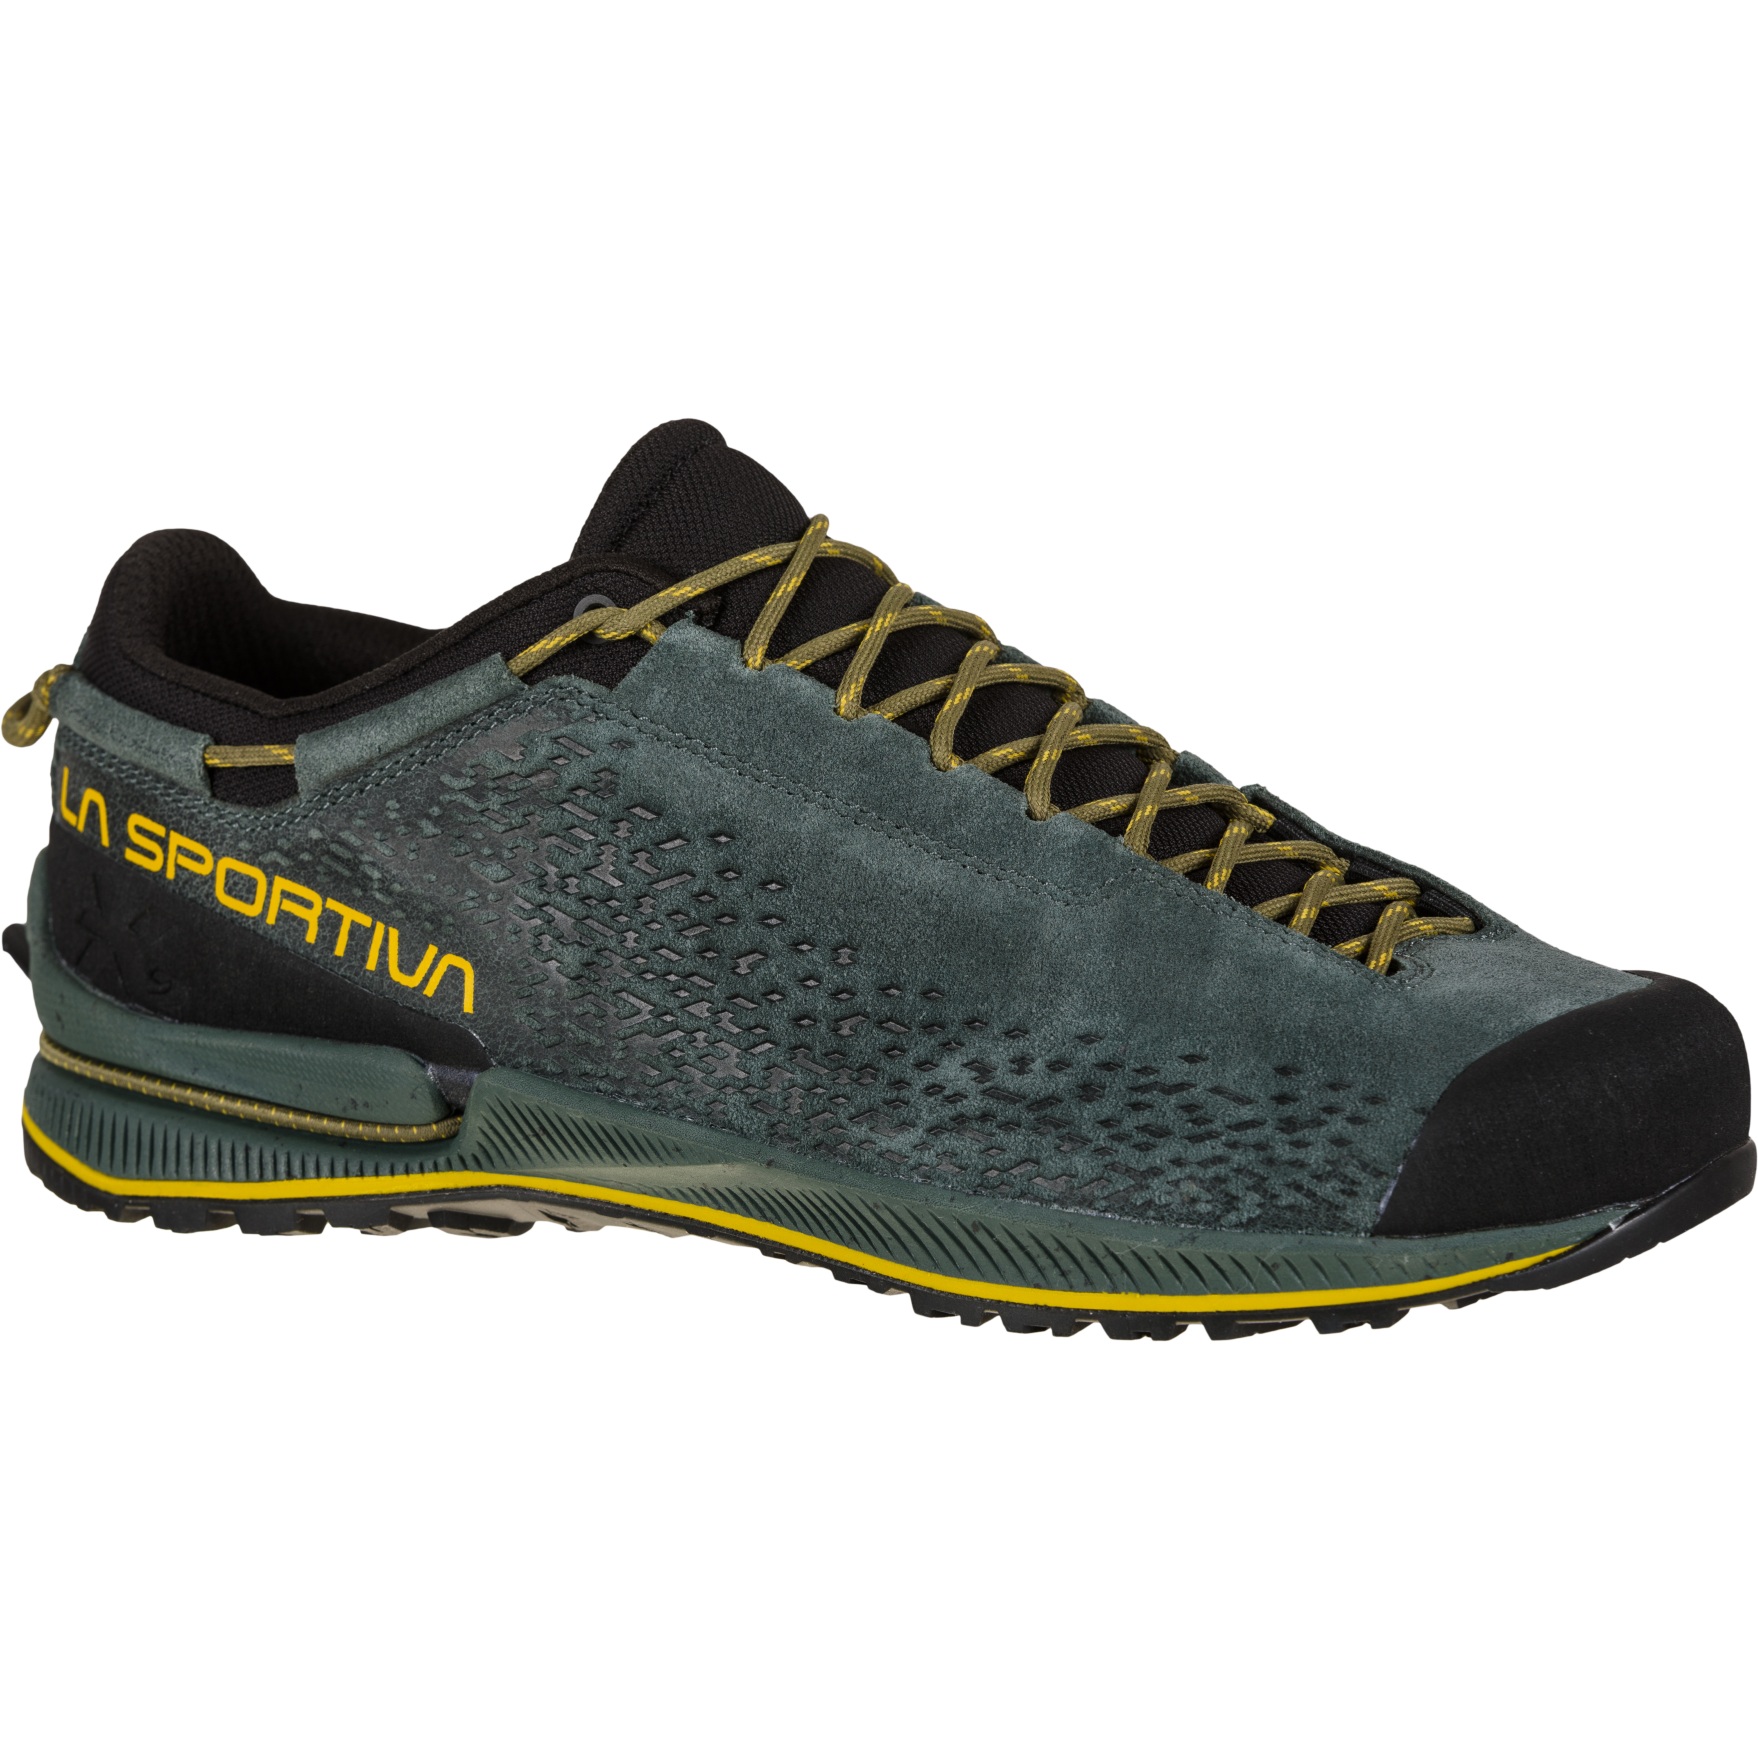 Picture of La Sportiva TX2 Evo Leather Approach Shoes - Charcoal/Moss